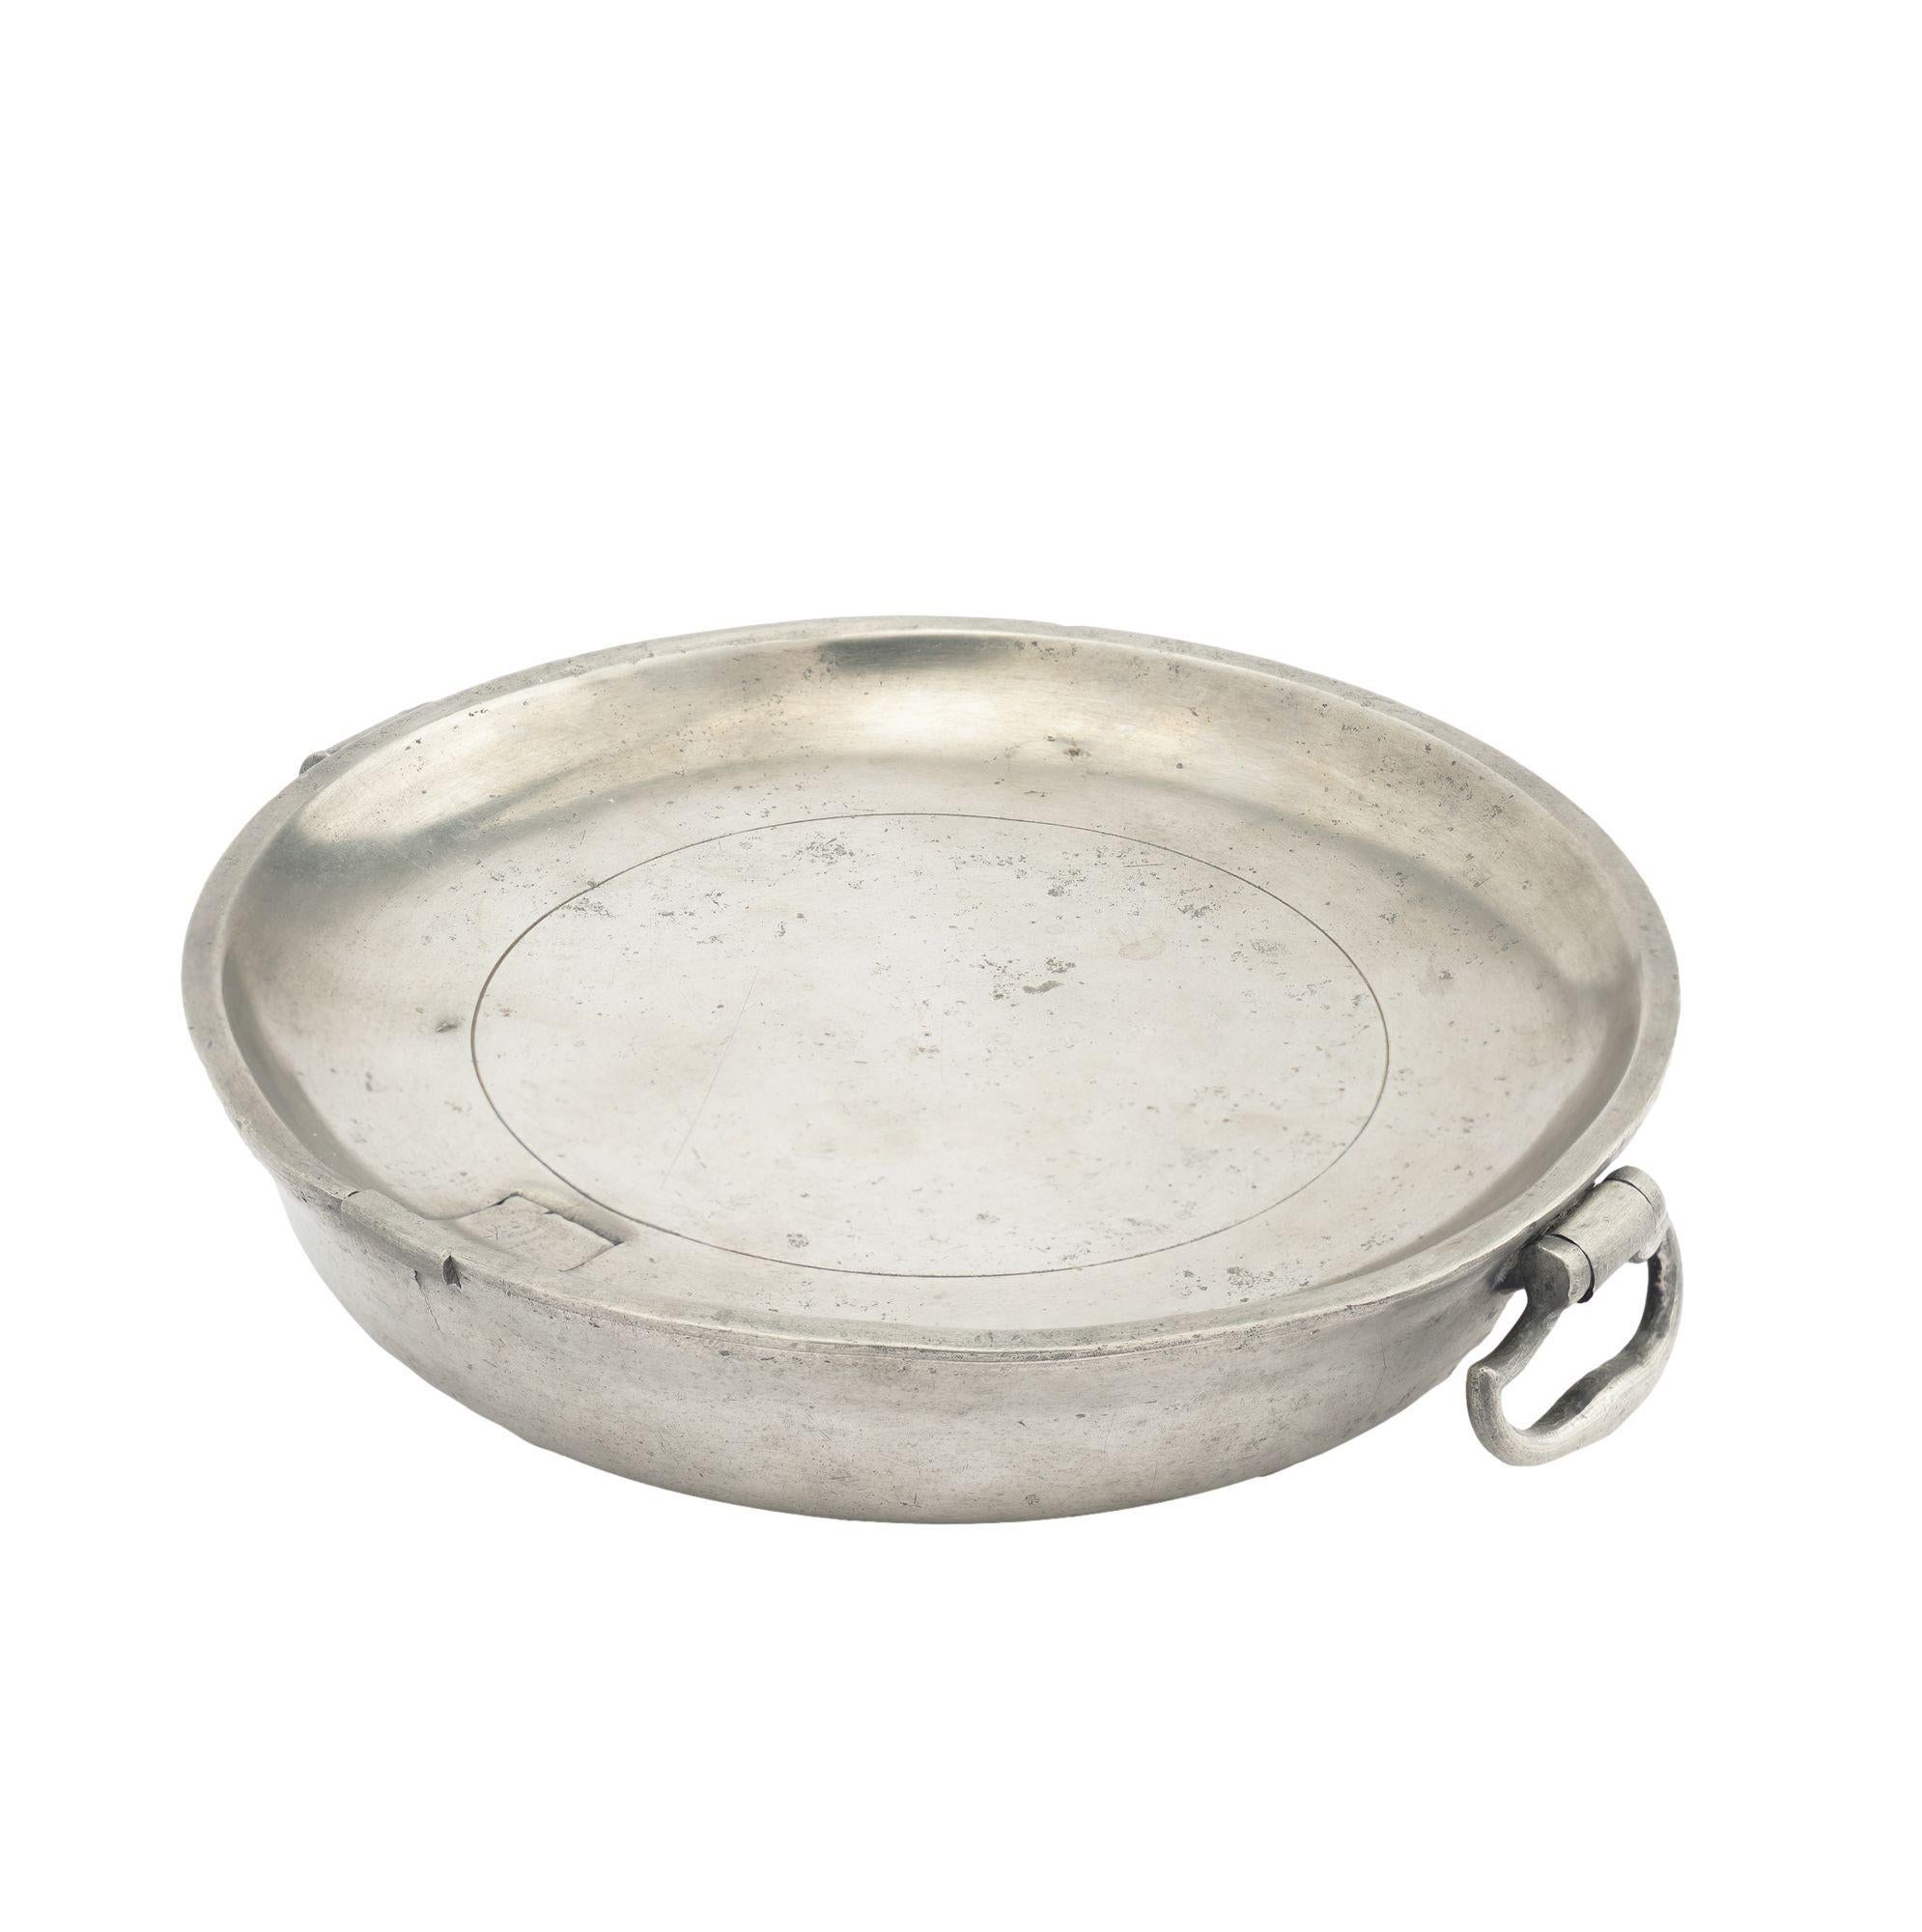 Pewter warming plate with drop bail handles, impressed with the mark of Edward Wilkes & Wm Villers.
Impressed on the underfoot: V&W, Birmingham
Birmingham, England, Moor Street, 1808-1827.